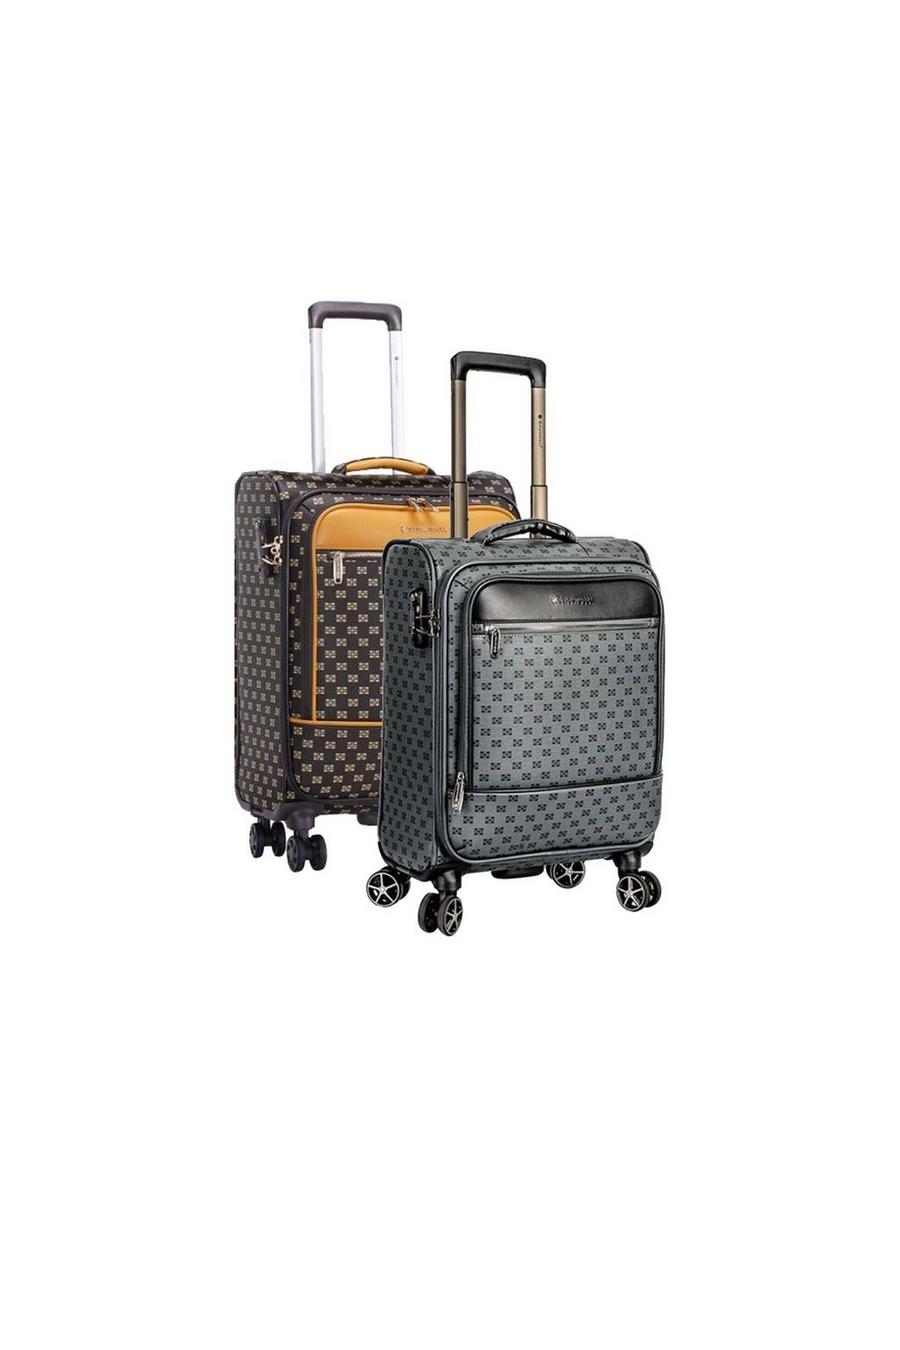 Brown Lightweight Luggage Travel Cabin Suitcase